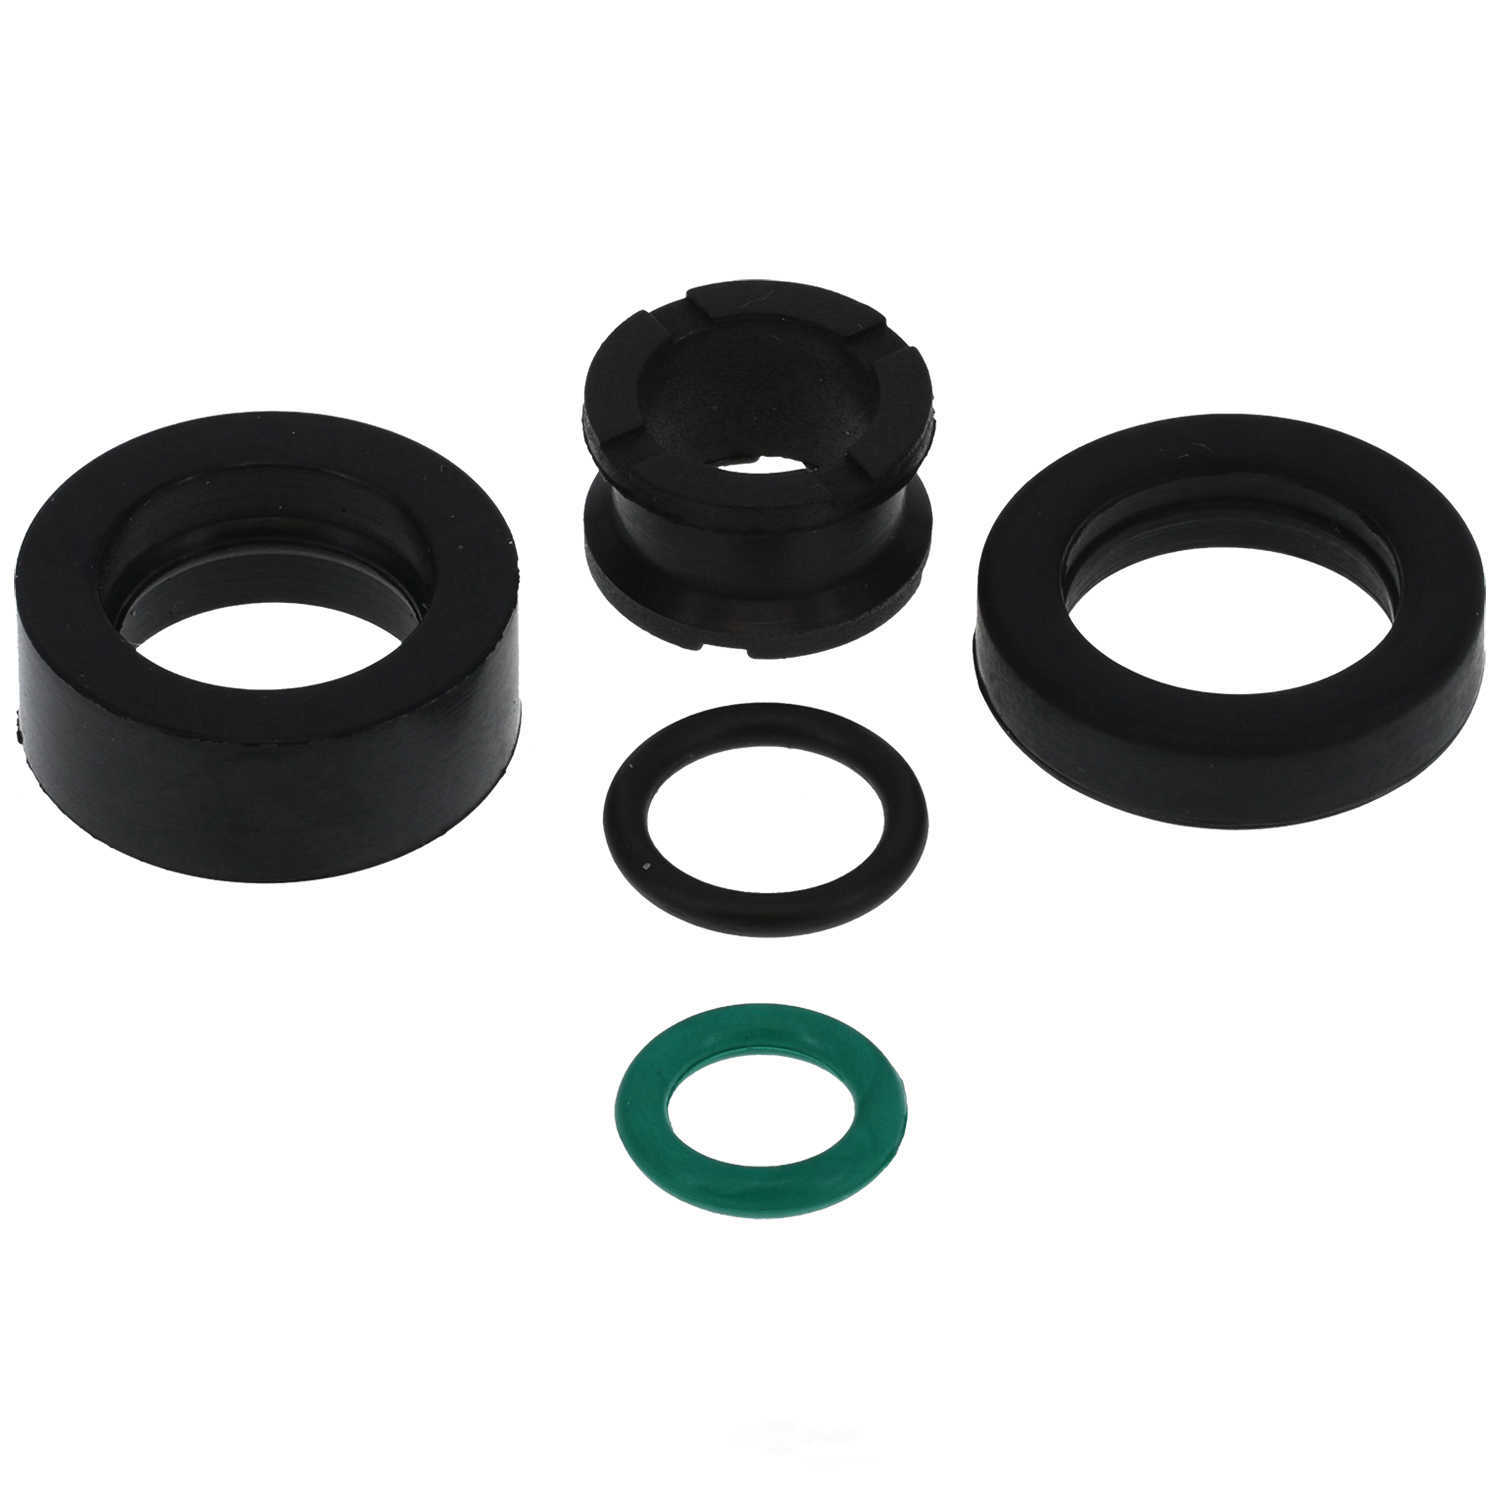 GB REMANUFACTURING INC. - Fuel Injector Seal Kit - GBR 8-016